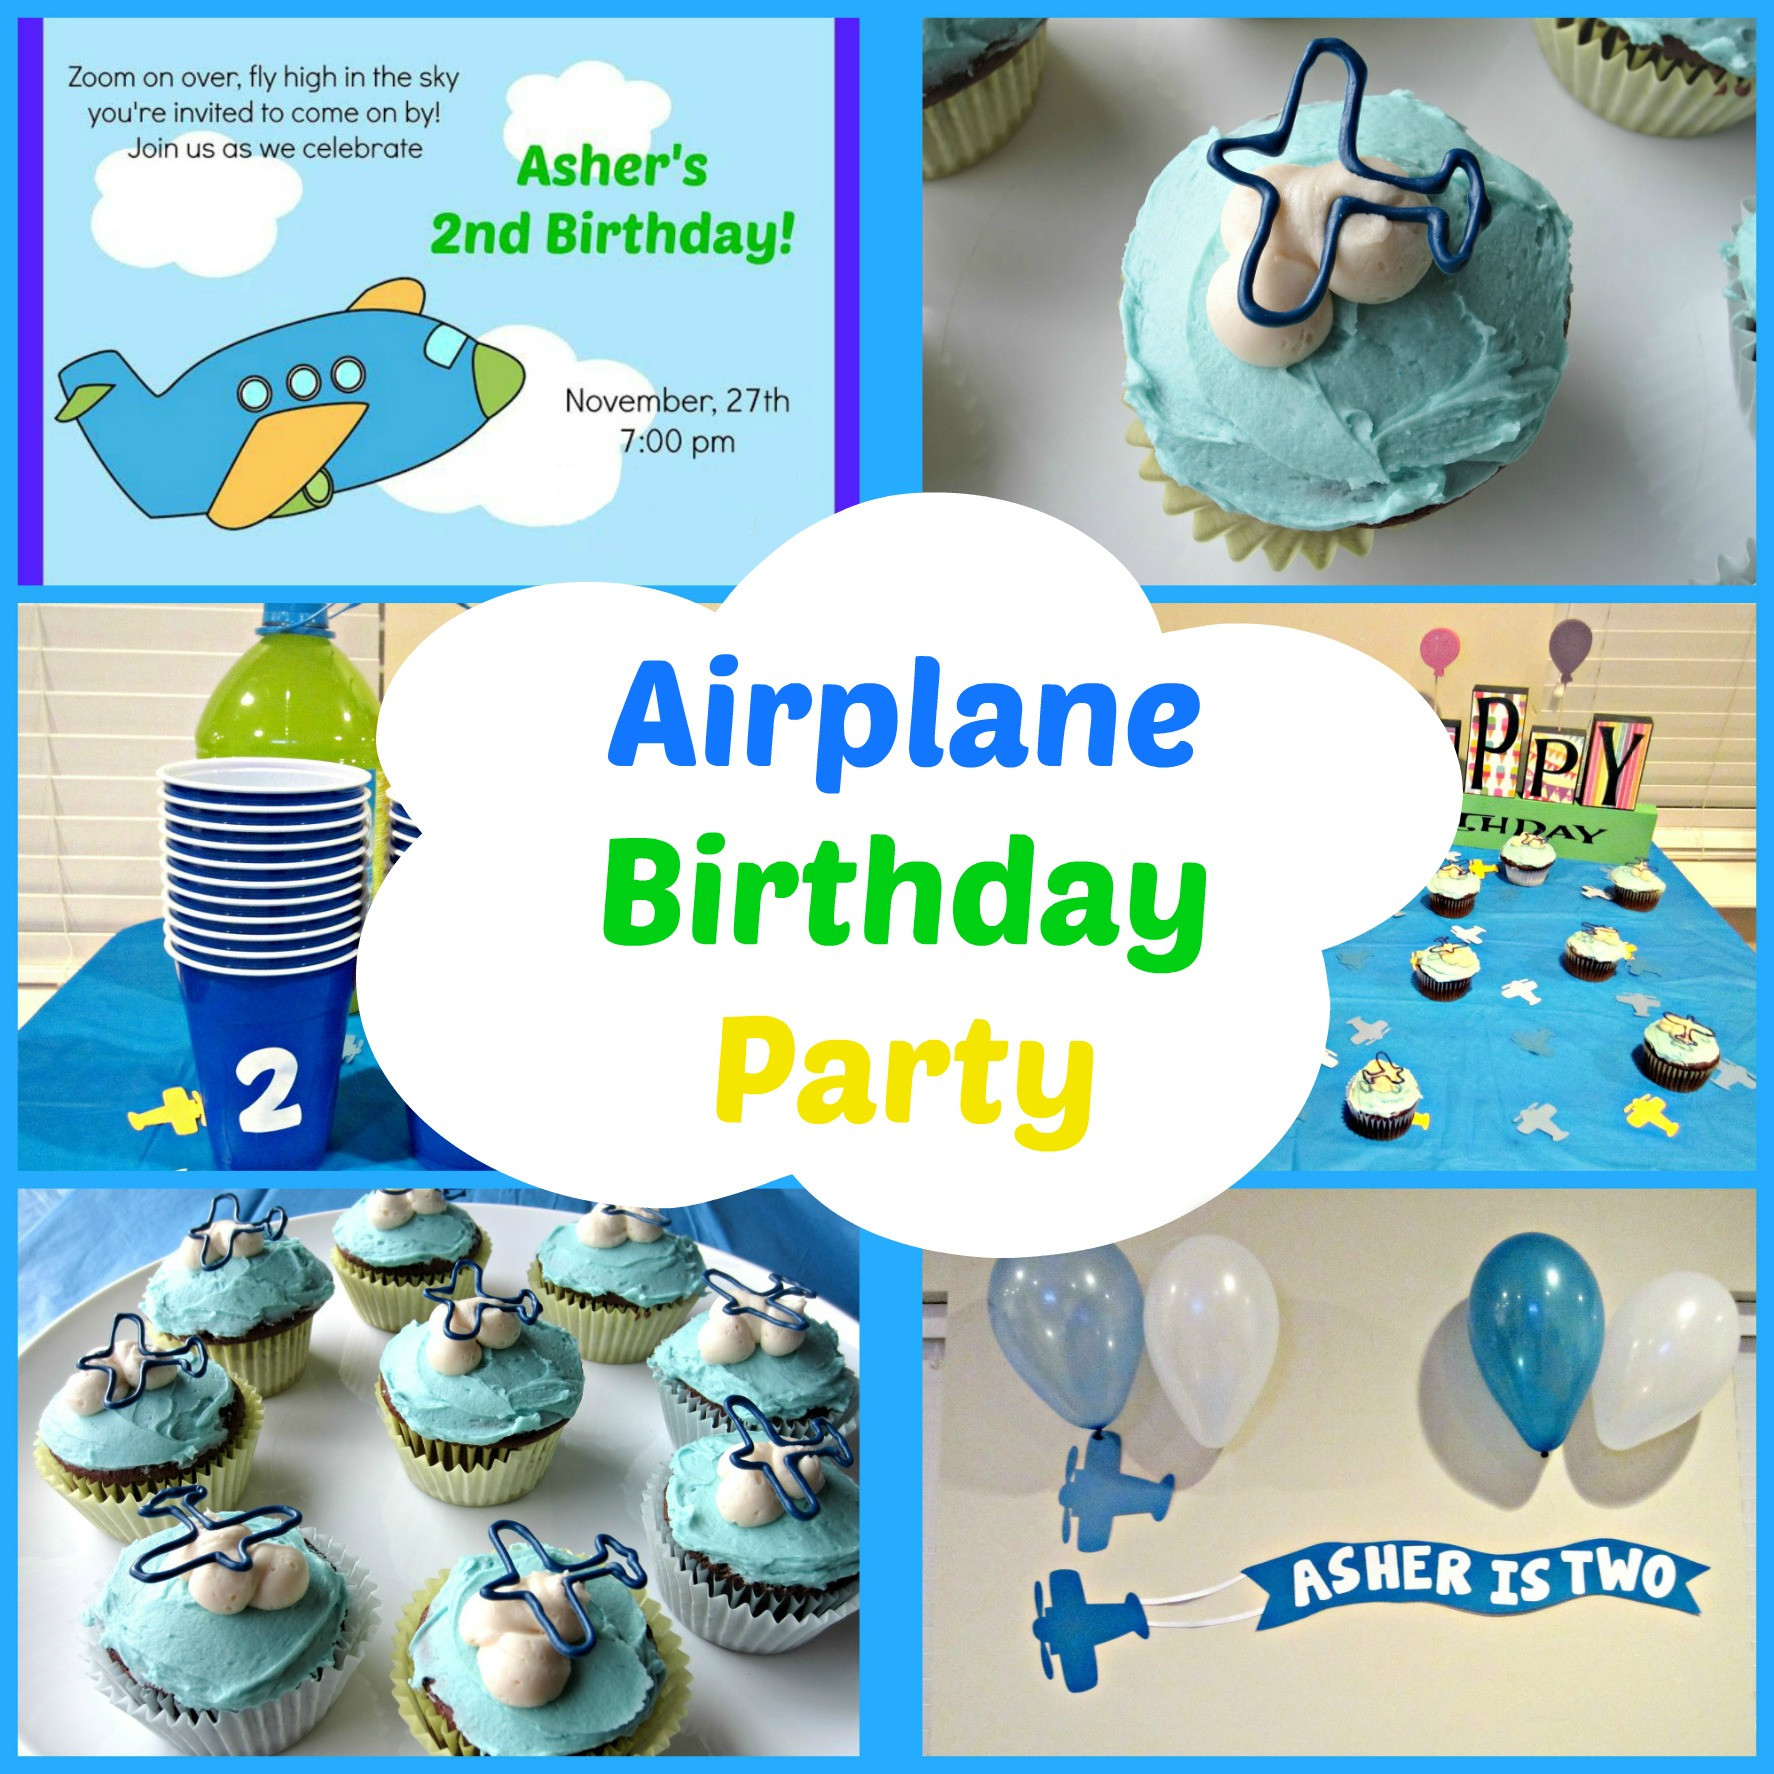 Airplane Birthday Party Ideas
 Airplane Birthday Party Love to be in the Kitchen